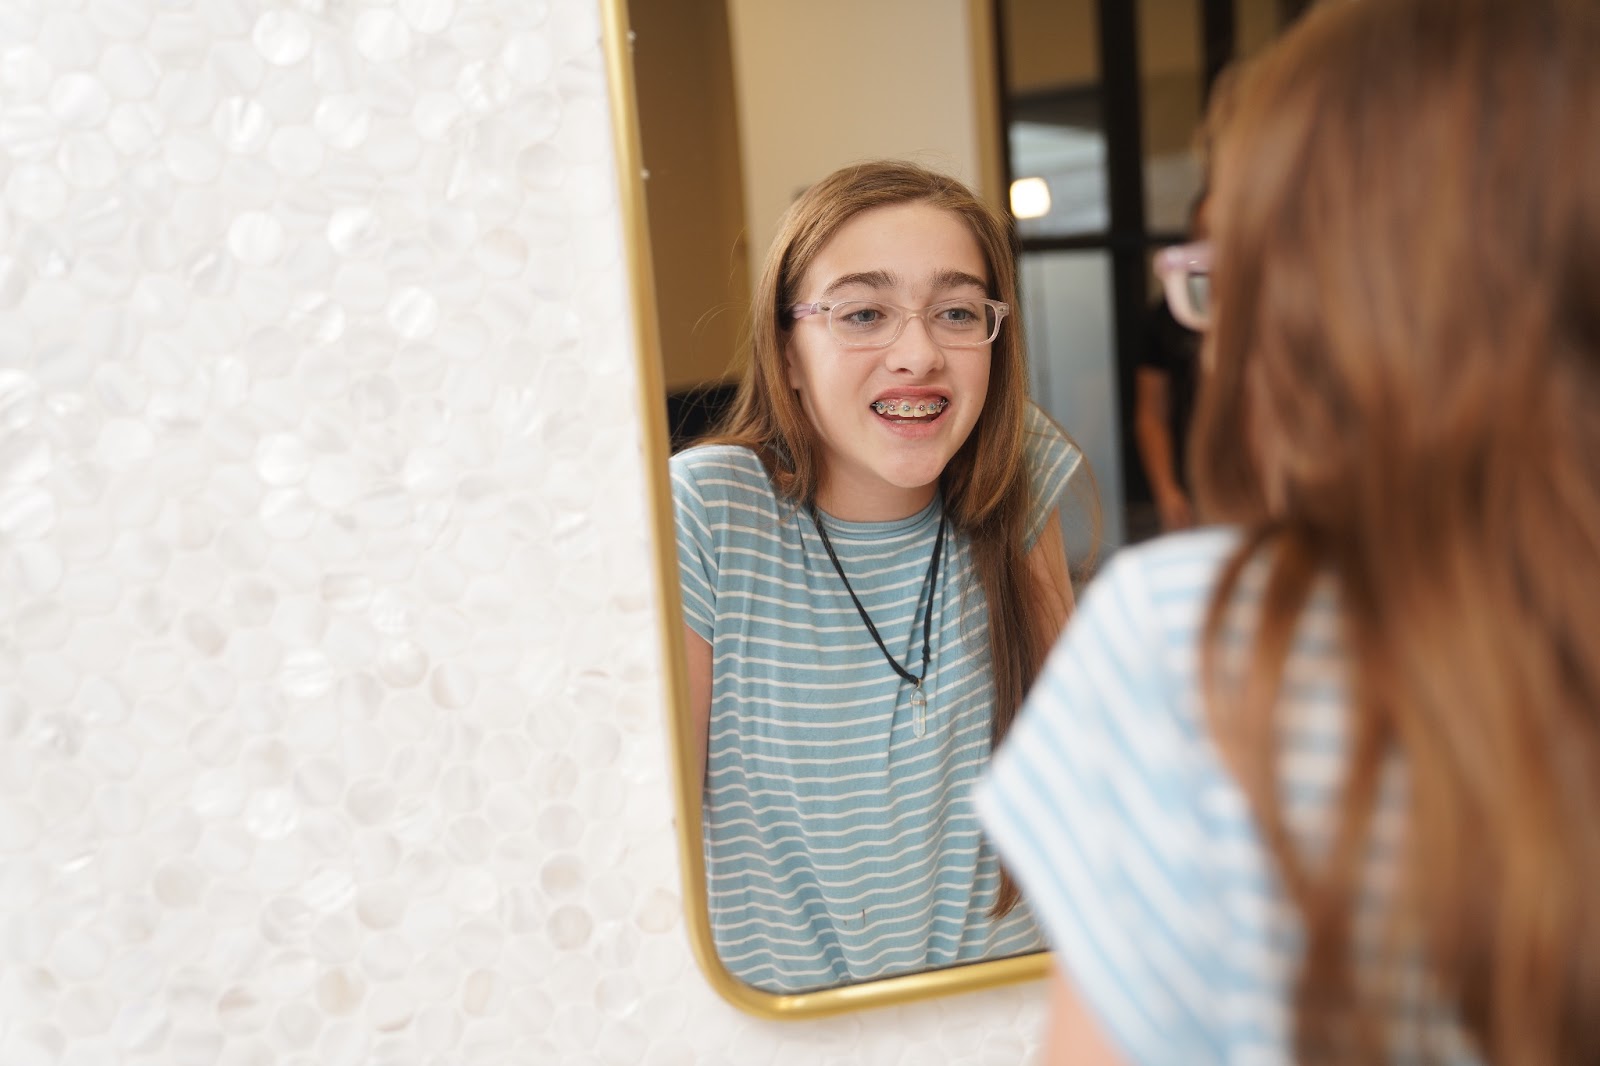 Orthodontic treatment is a big deal, so having some questions is natural before treatment begins. At Sandifer Orthodontics, we want it to be easy to get the answers you need.